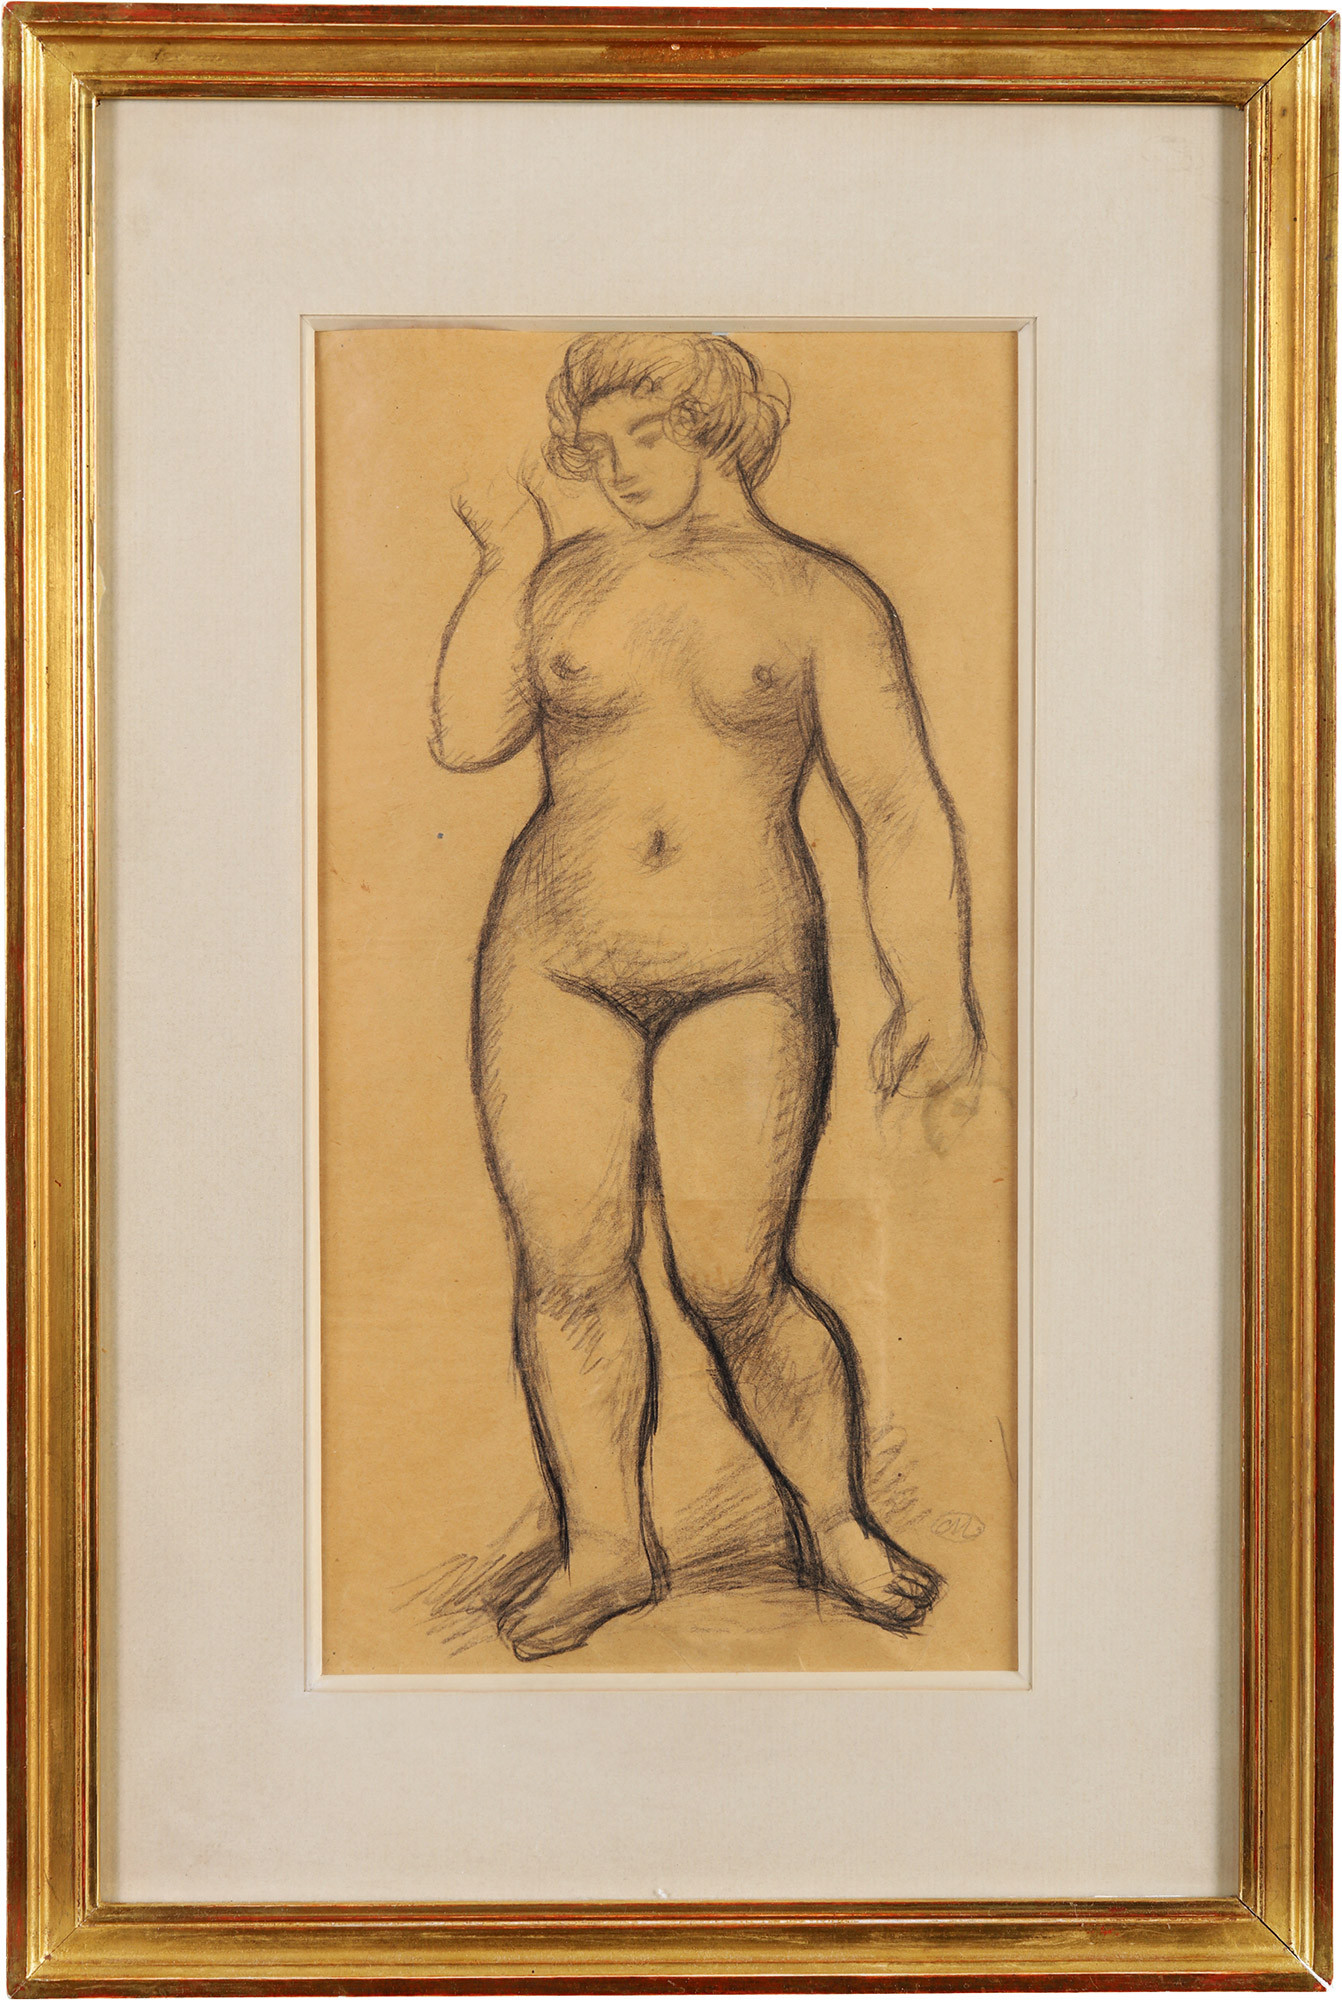 The sketch of “The Human Body” of Aristide Mailllol, a famous French sculptor, with certificate